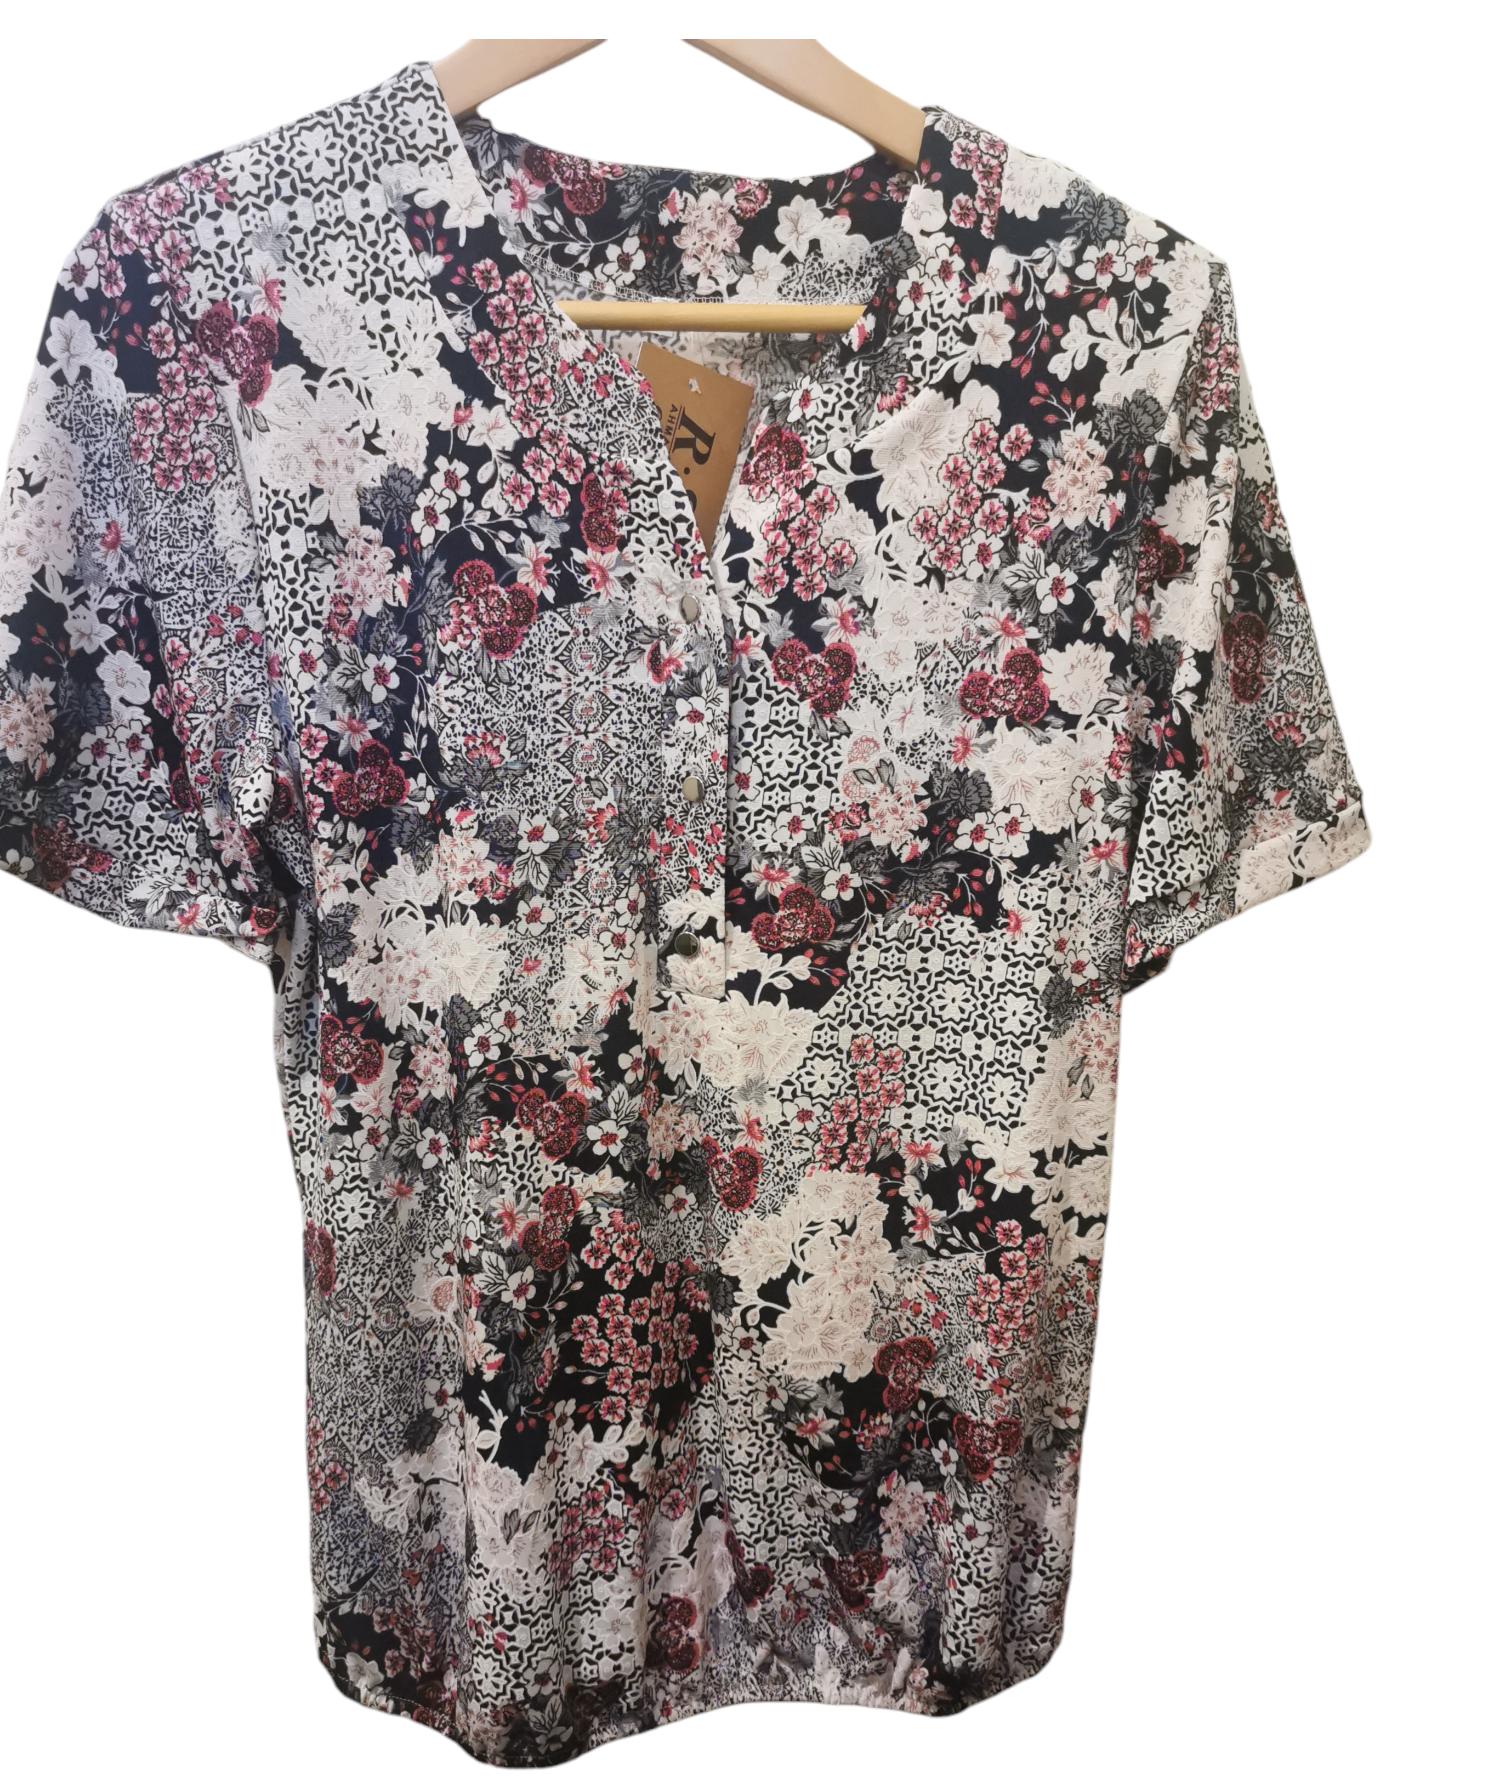 RSN Ladies Round Neck Top with 3 buttons Floral Garden Print